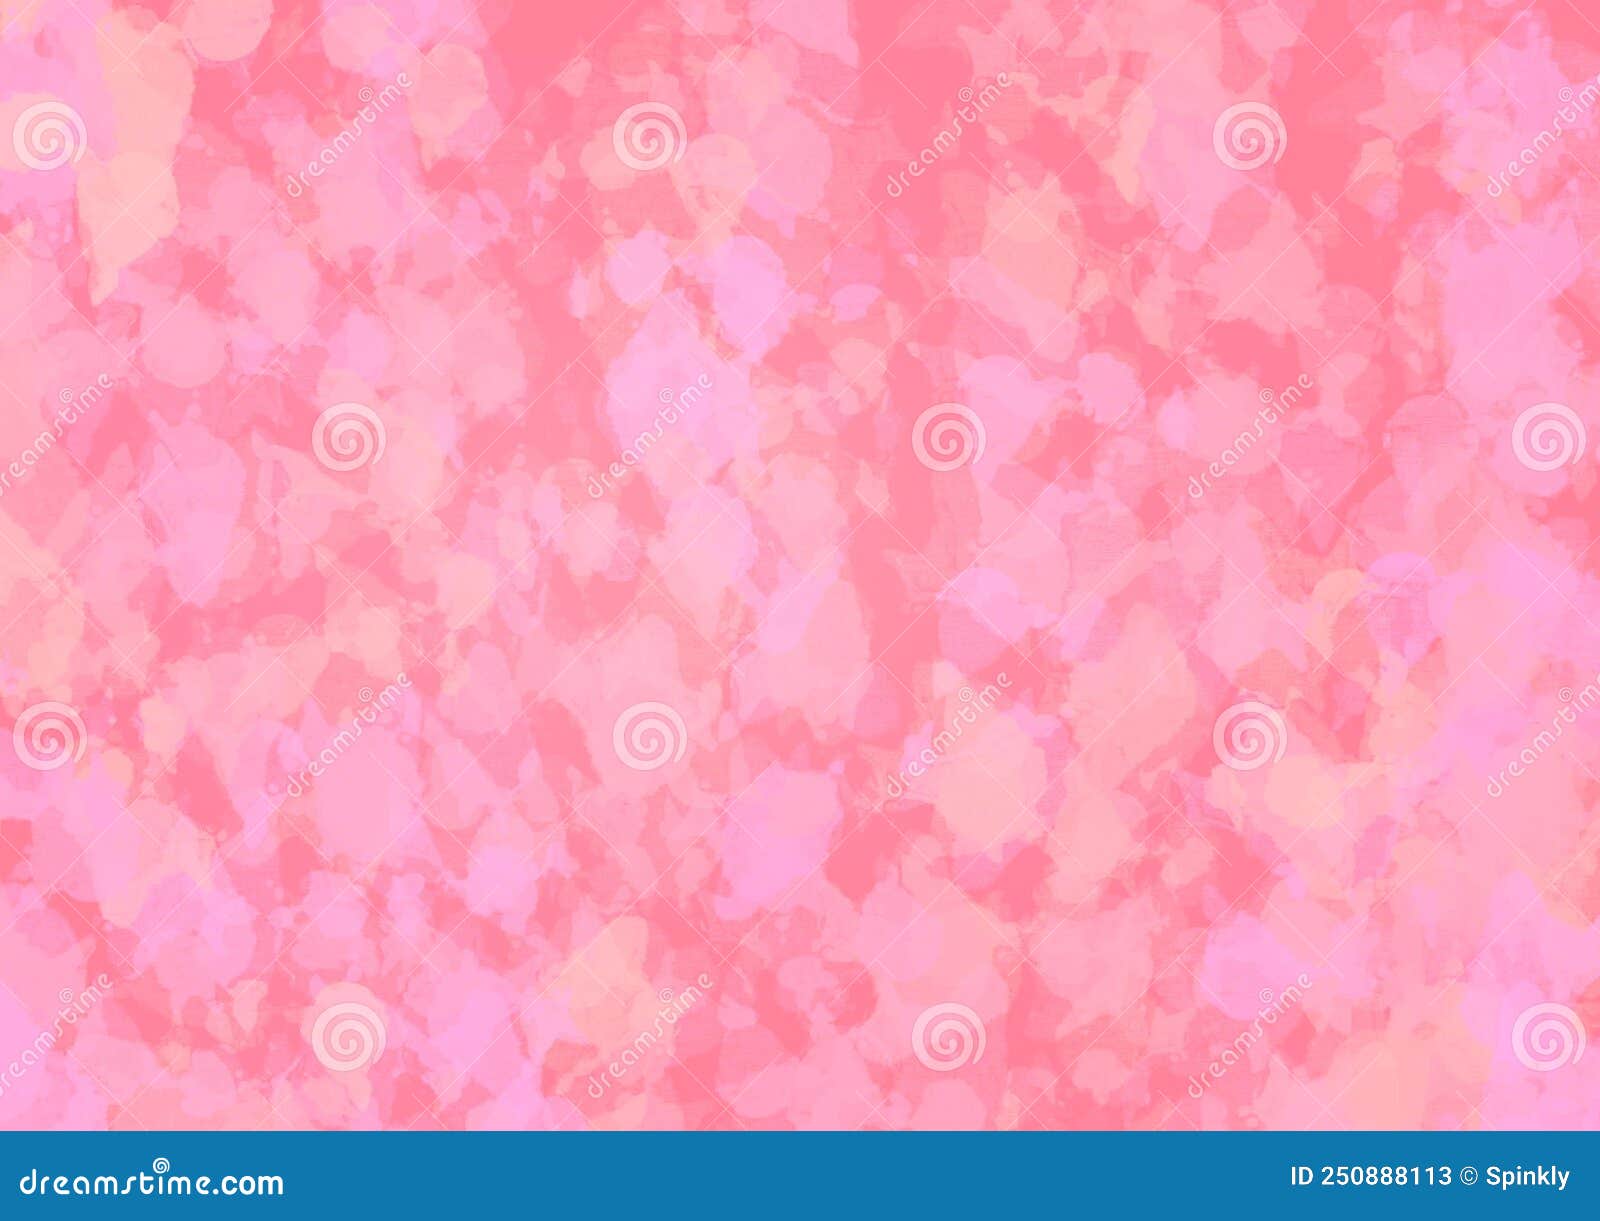 Pink Textured Background Wallpaper for Designs Stock Image - Image of ...